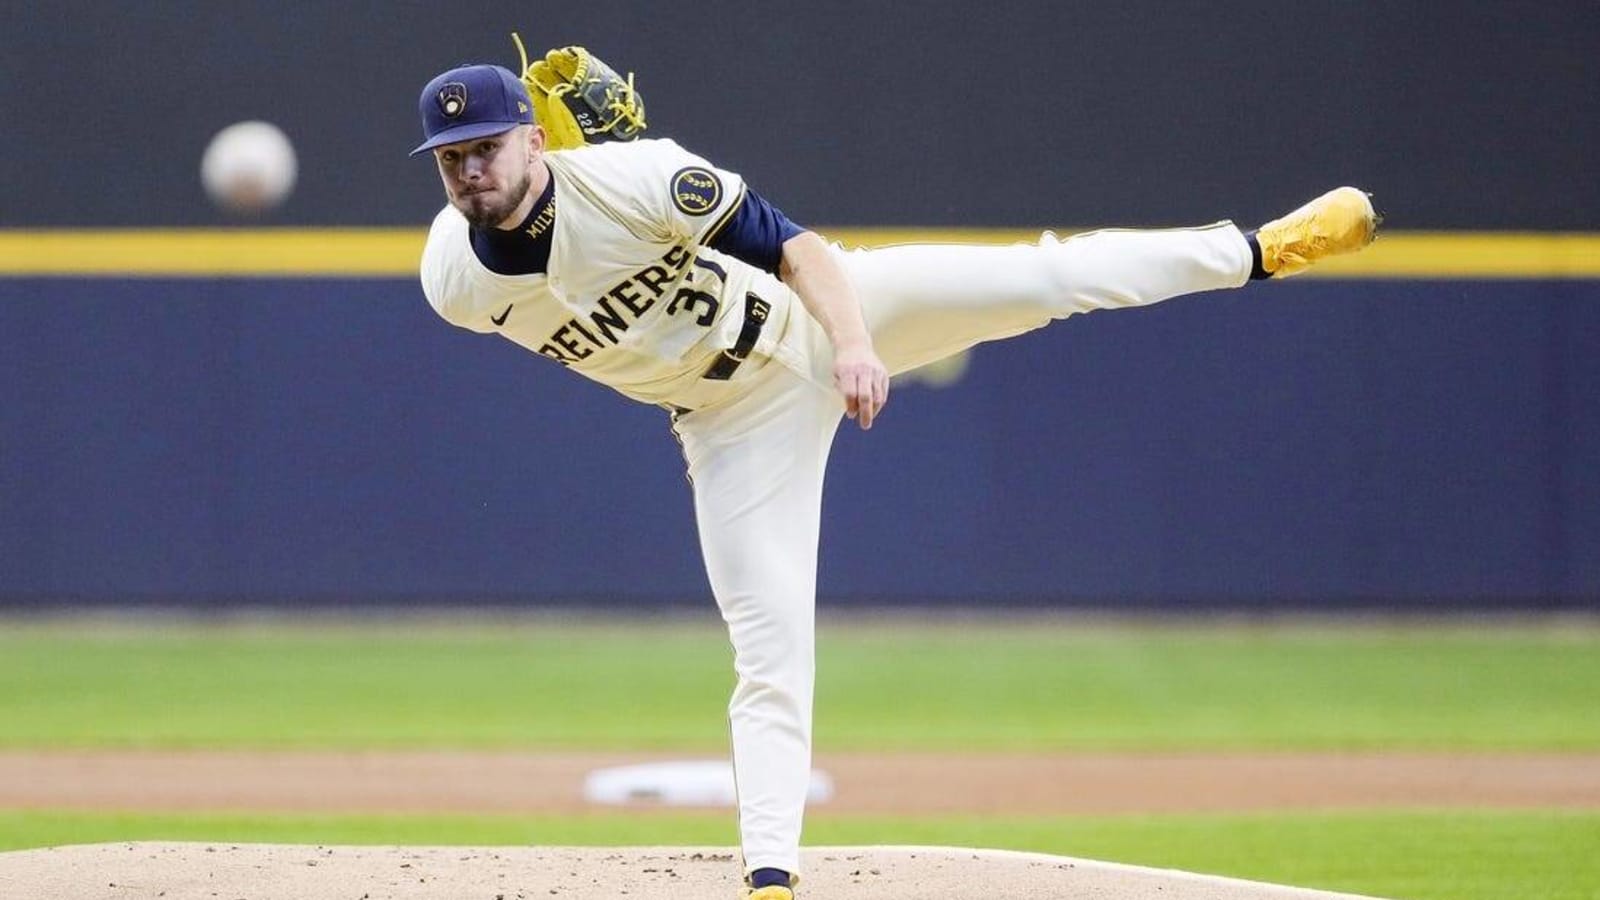 Following trade, Brewers&#39; DL Hall &#39;super excited&#39; to face Orioles